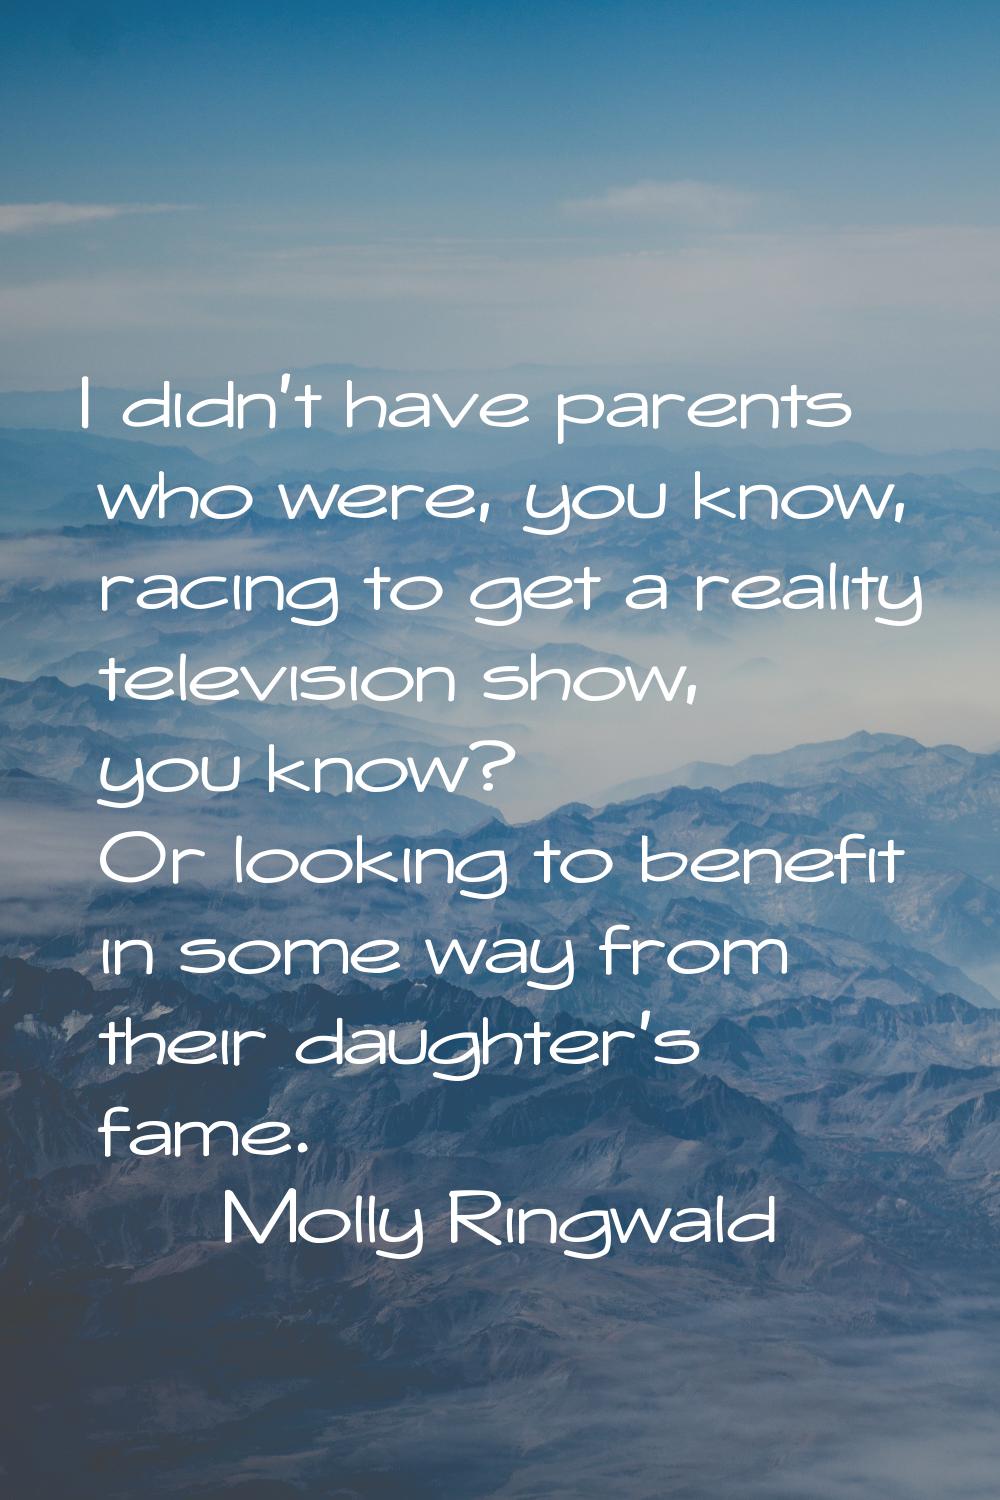 I didn't have parents who were, you know, racing to get a reality television show, you know? Or loo